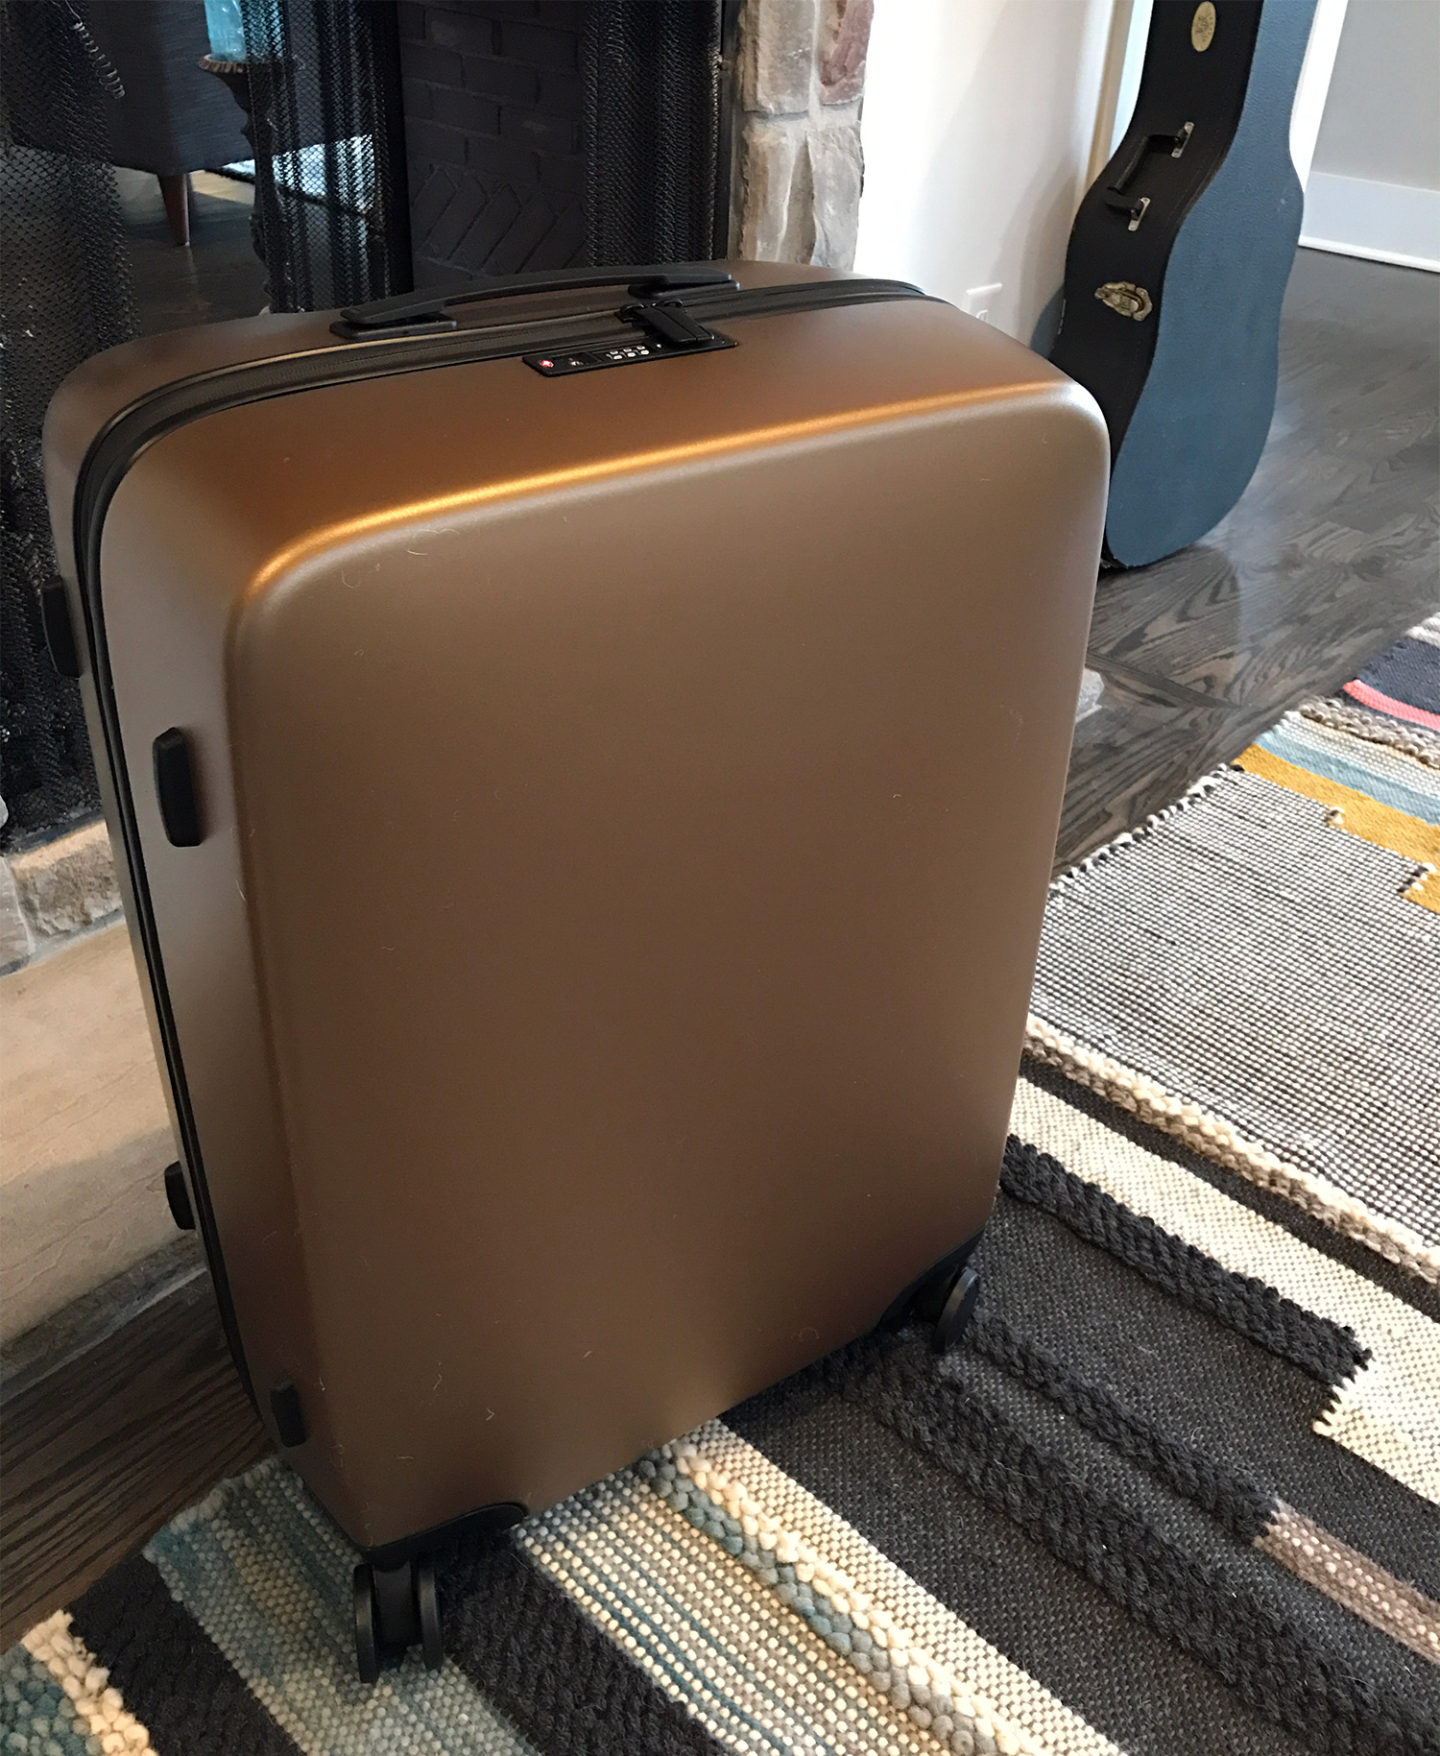 REVIEW: Raden A28 Check Smart Luggage - At Home in the Future